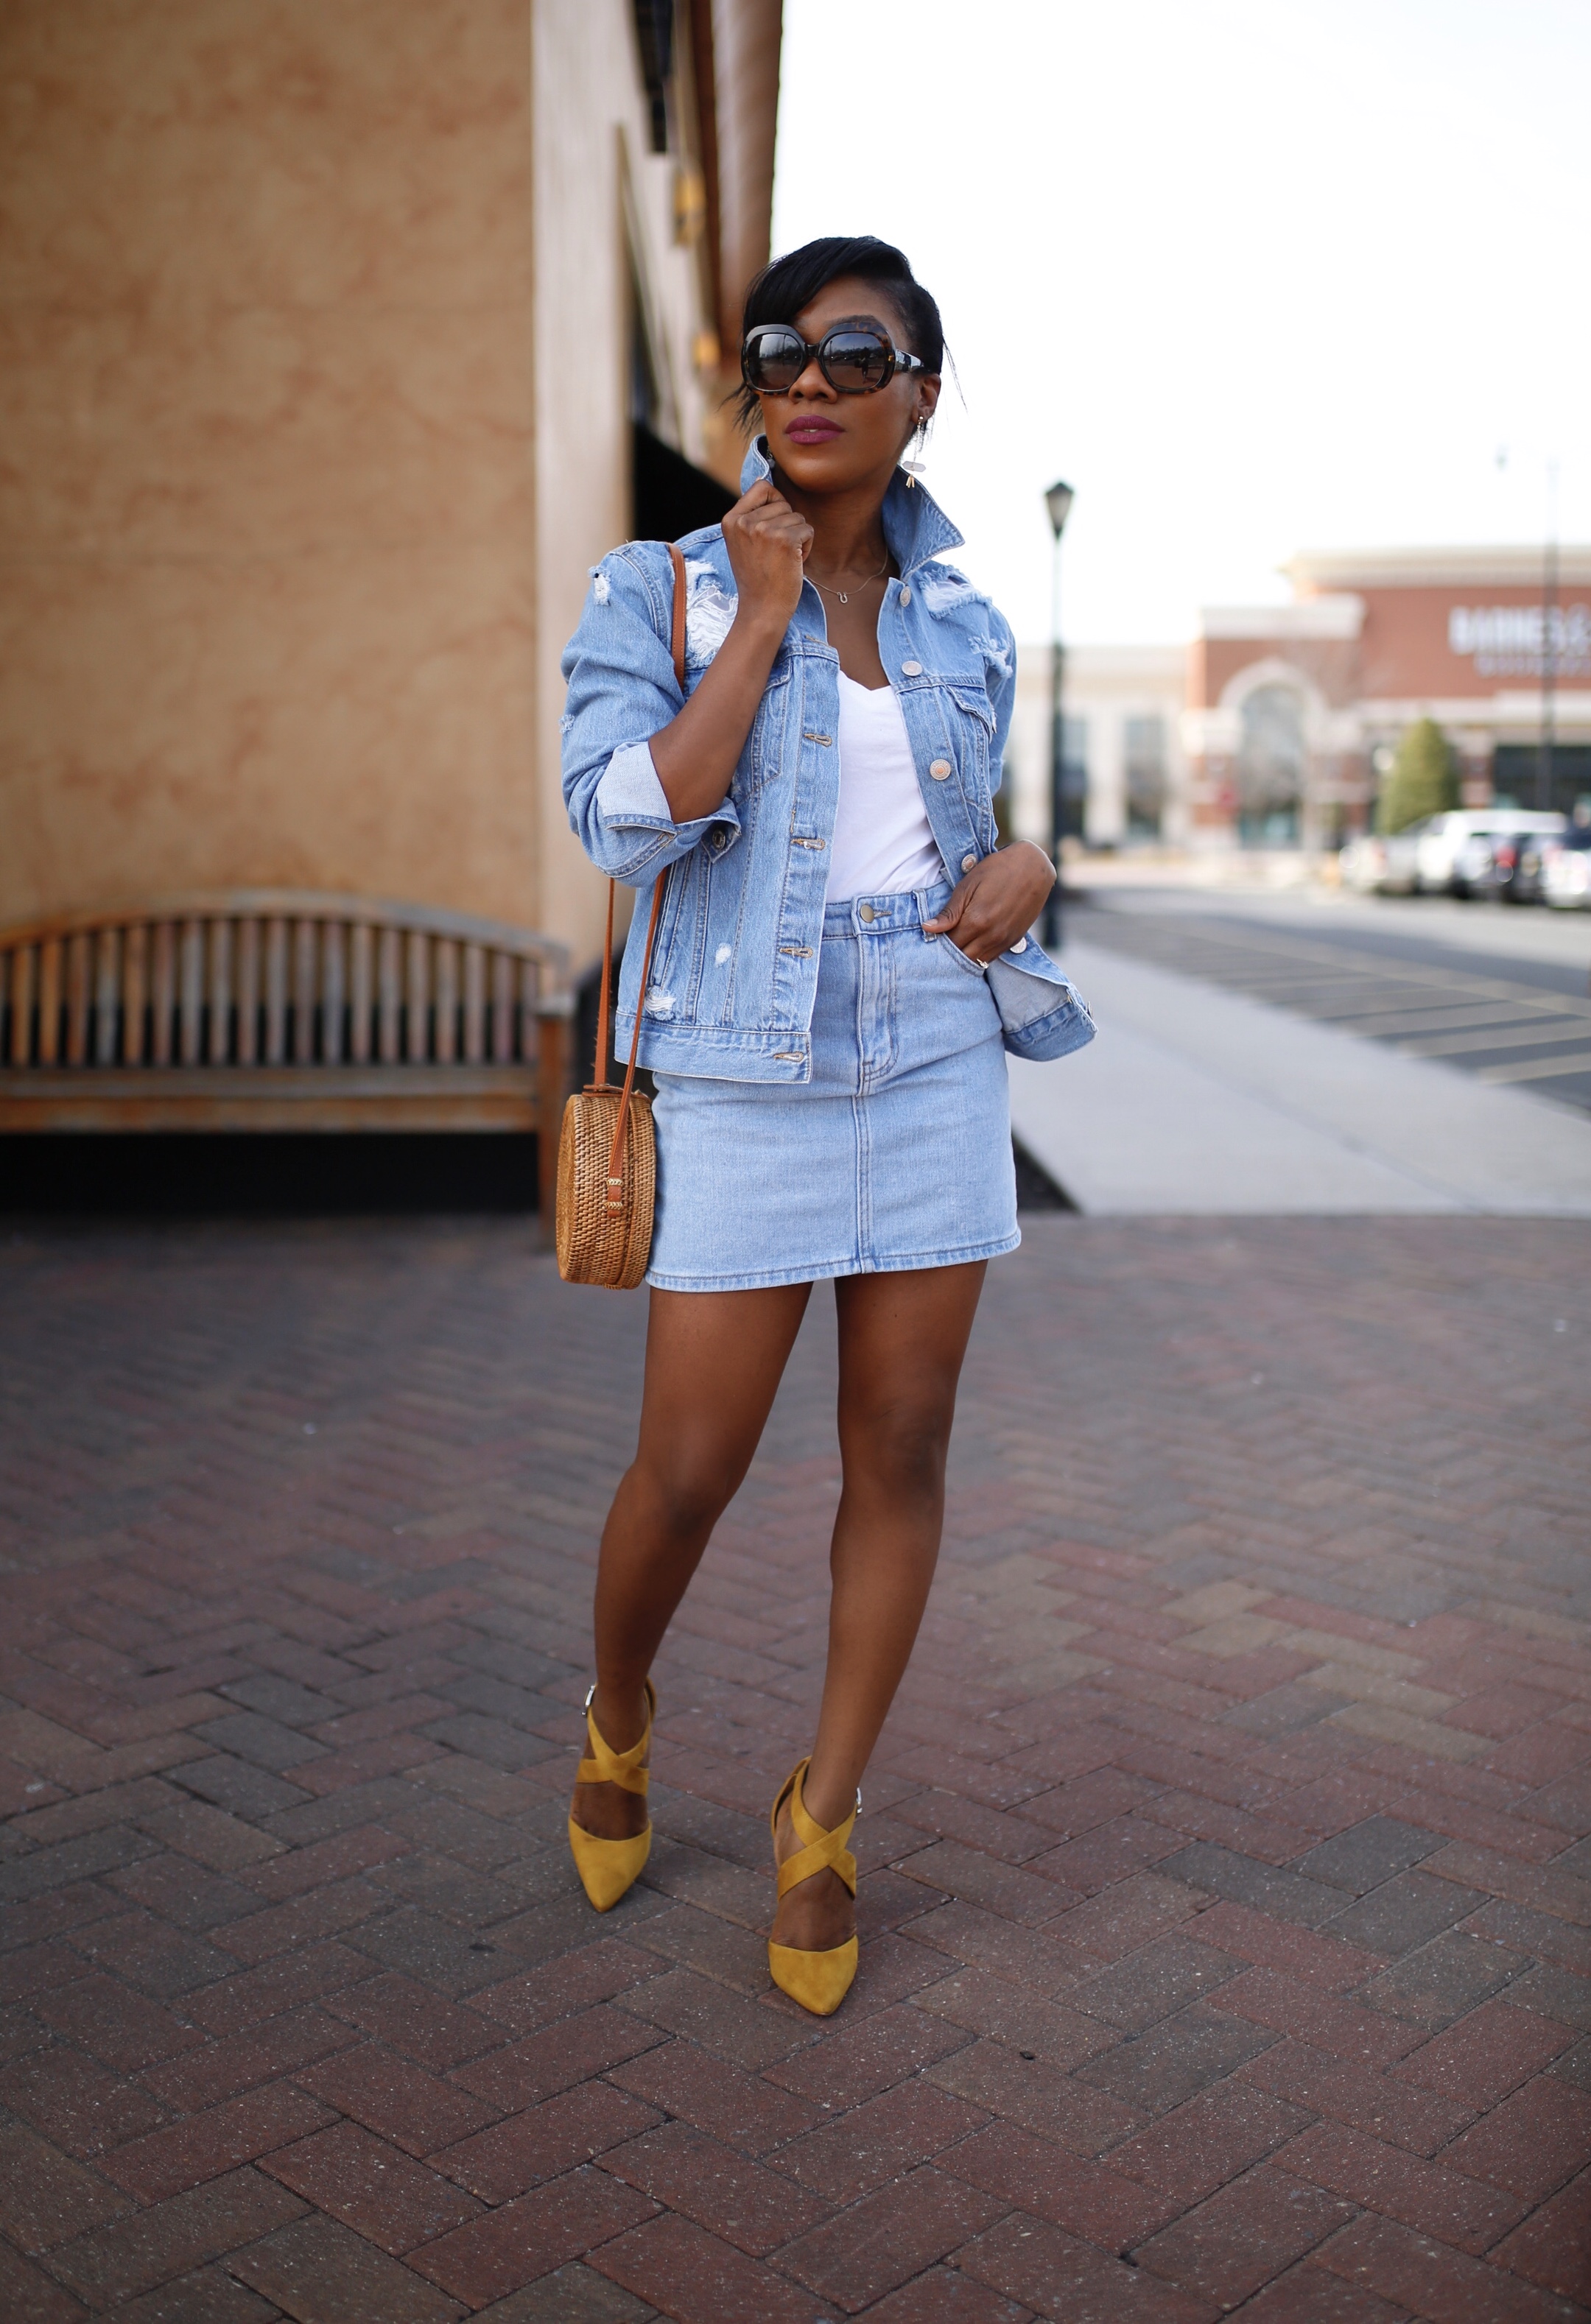 How to wear a denim jacket with a denim mini skirt! You'd love these three stylish ways. And guess what? You can recreate this style with pieces from your closet.